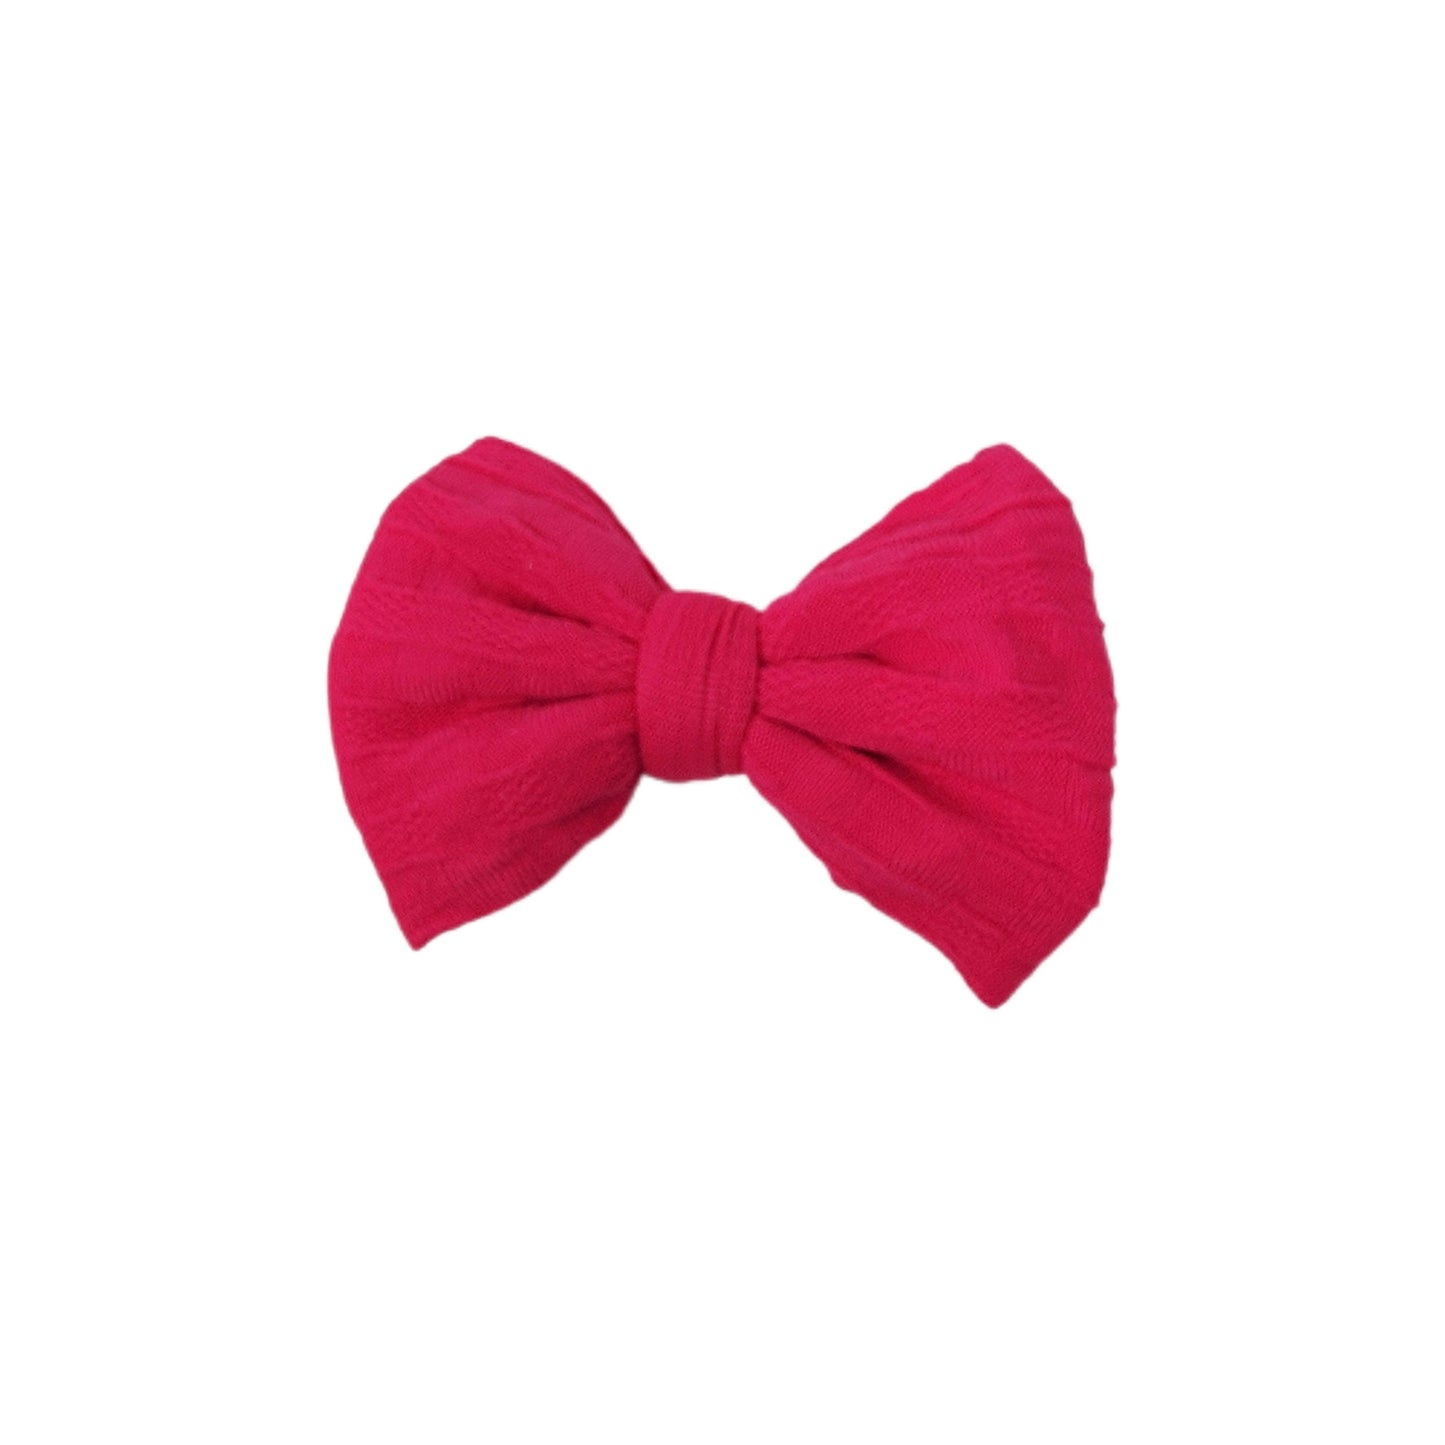 Hot Pink Woven Knit Fabric Bow 4" 